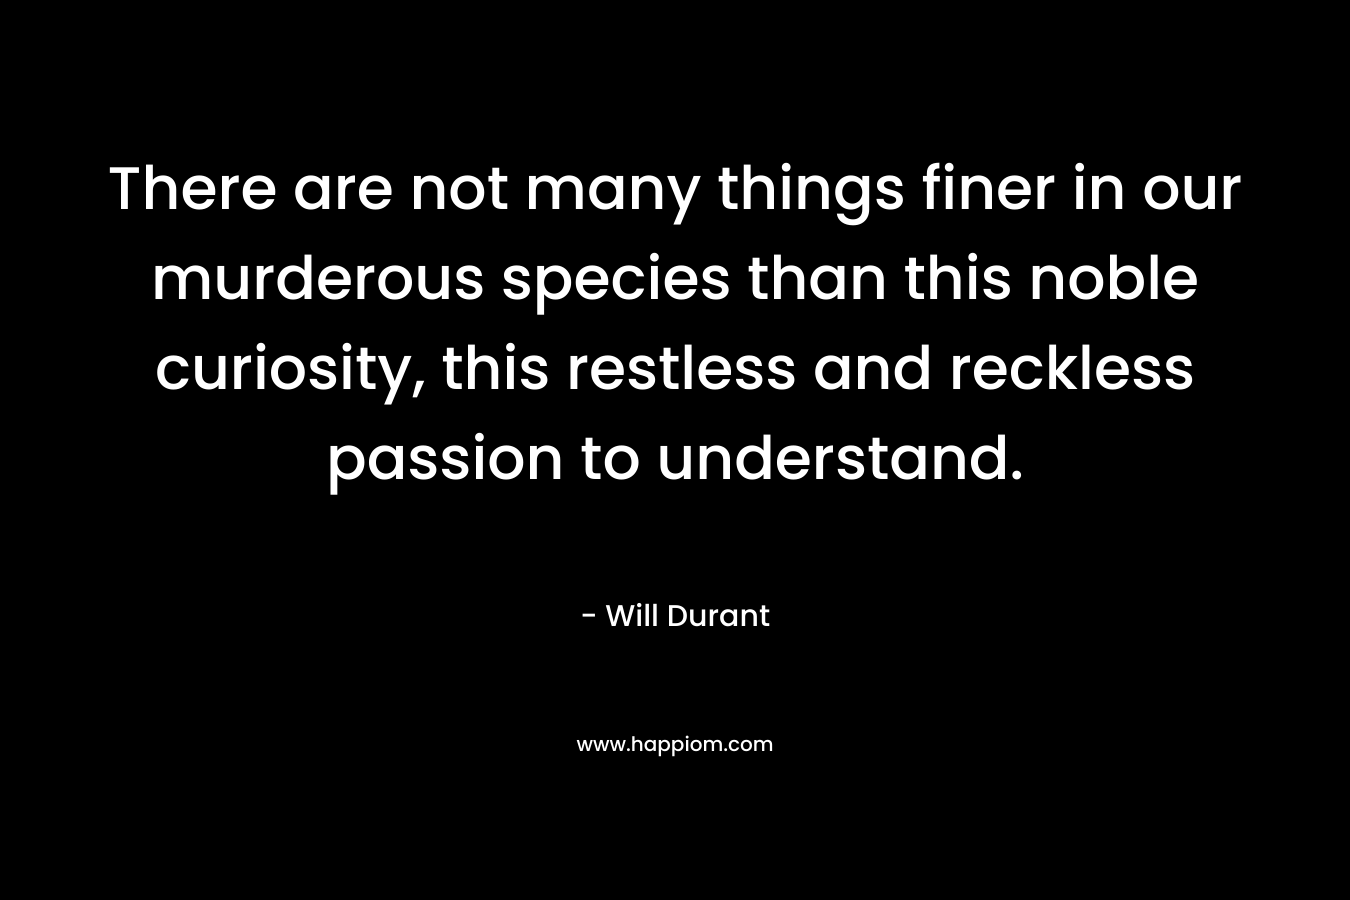 There are not many things finer in our murderous species than this noble curiosity, this restless and reckless passion to understand. – Will Durant